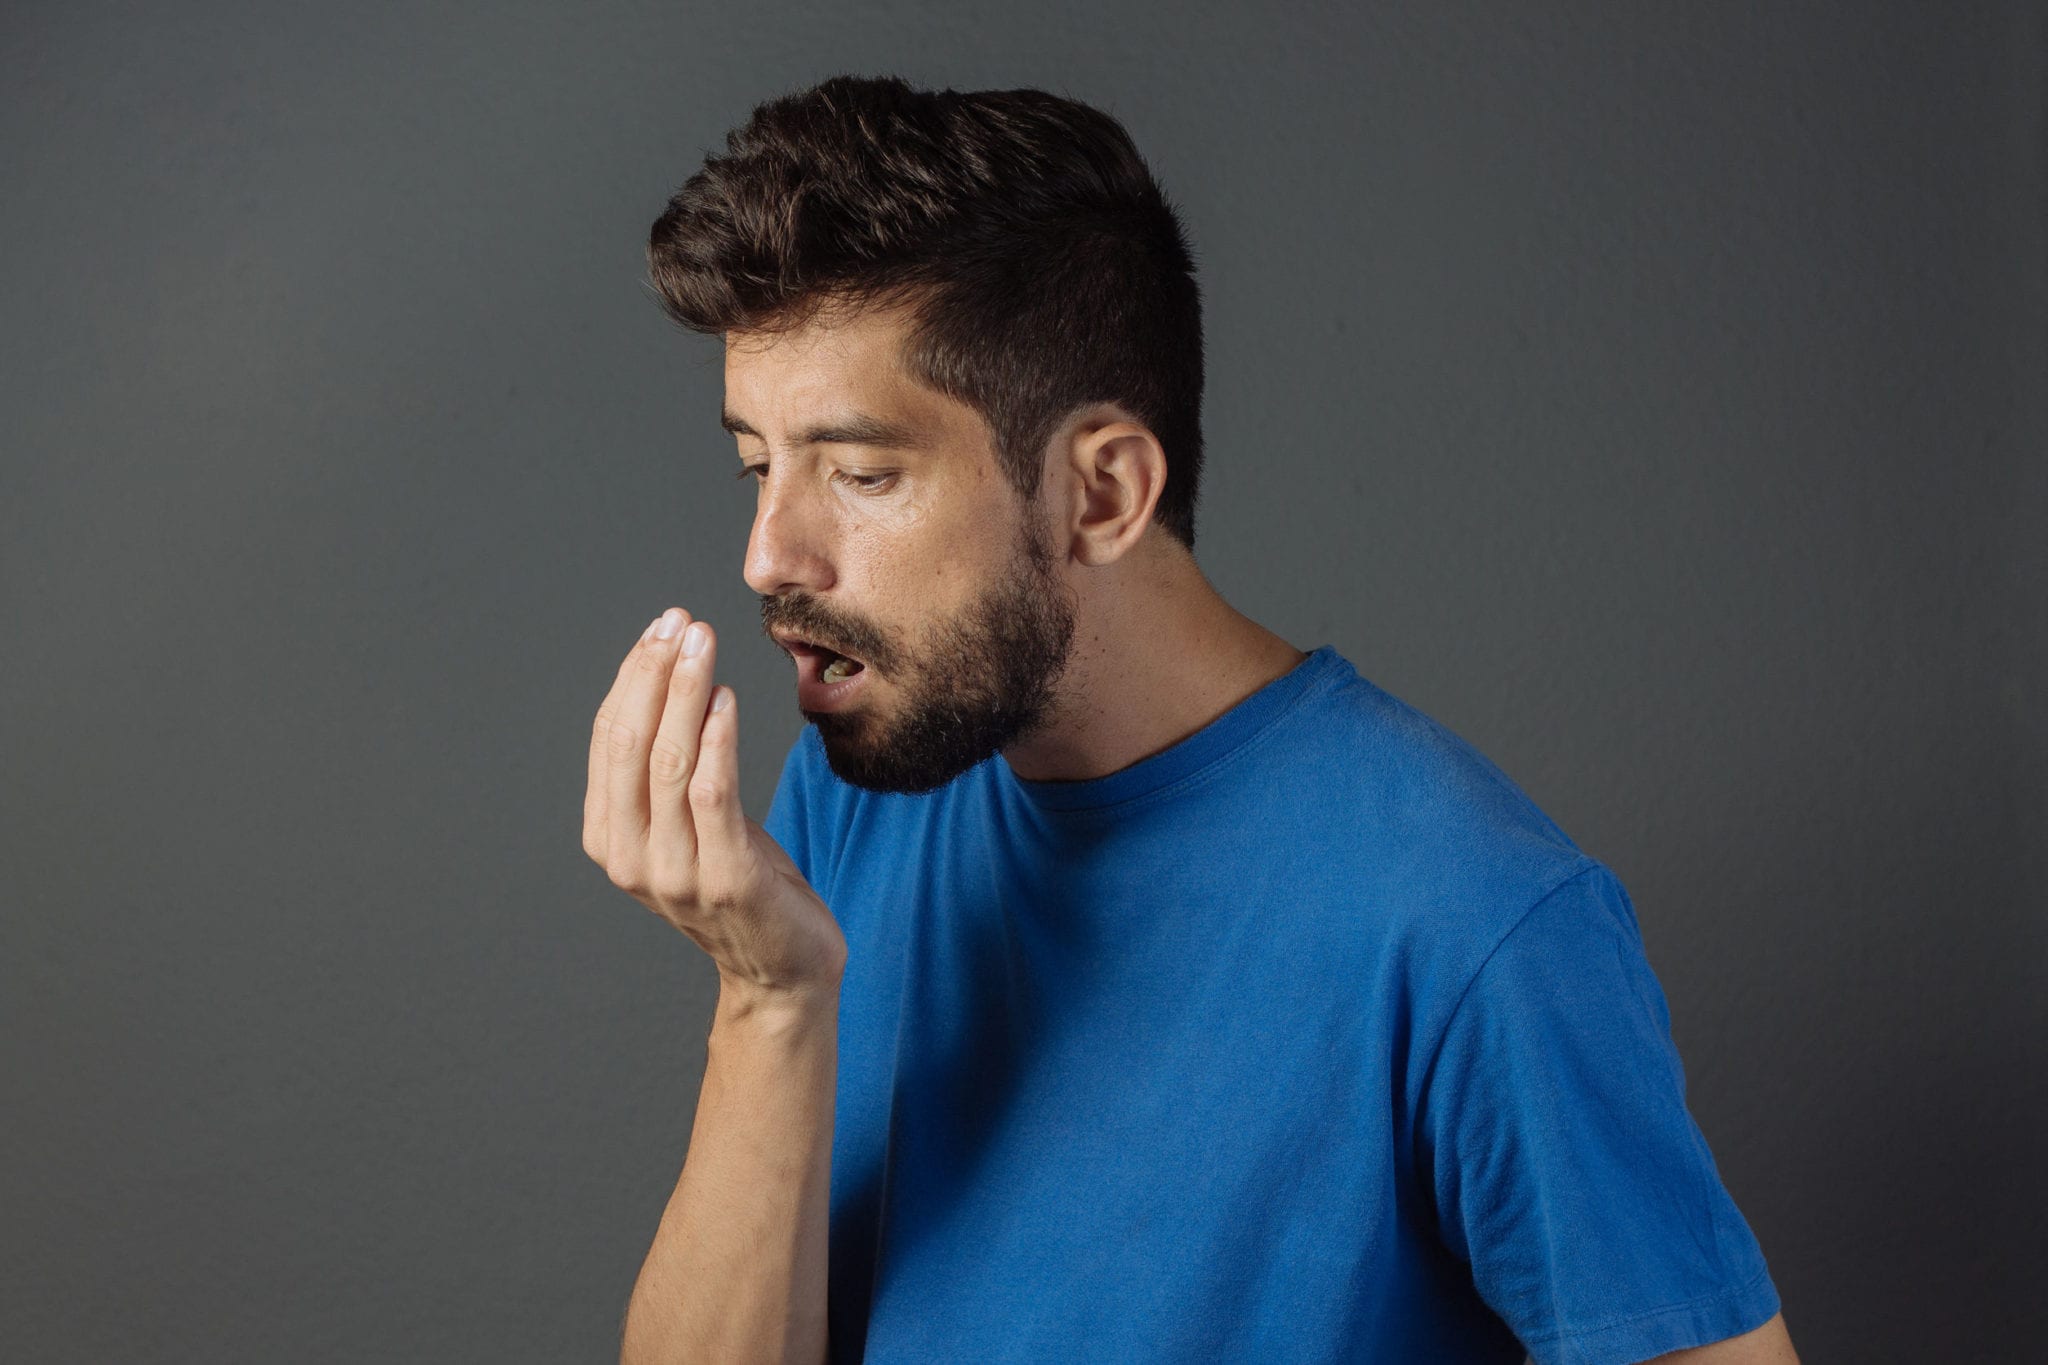 More Than Bad Breath: Health Problems Associated with Halitosis